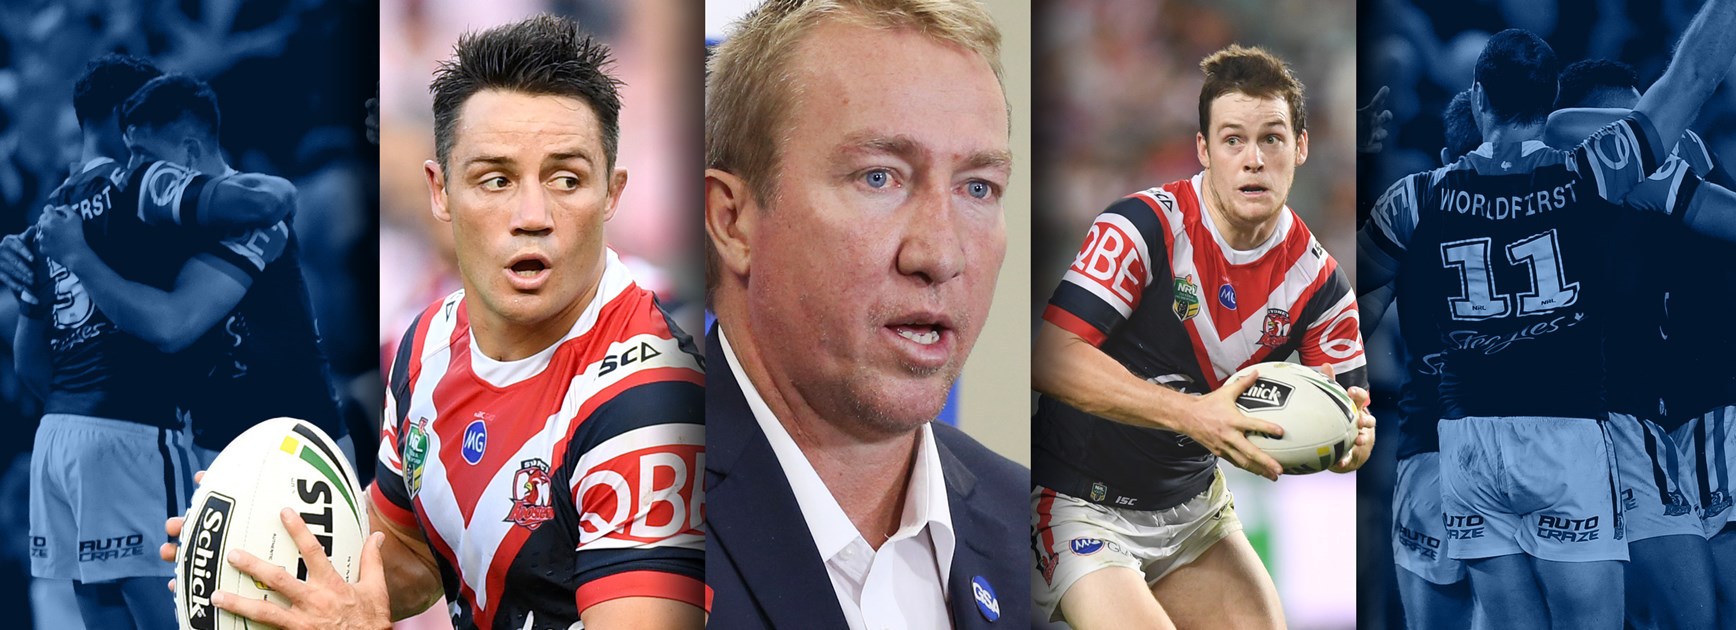 Sydney Roosters 2019 Season Preview